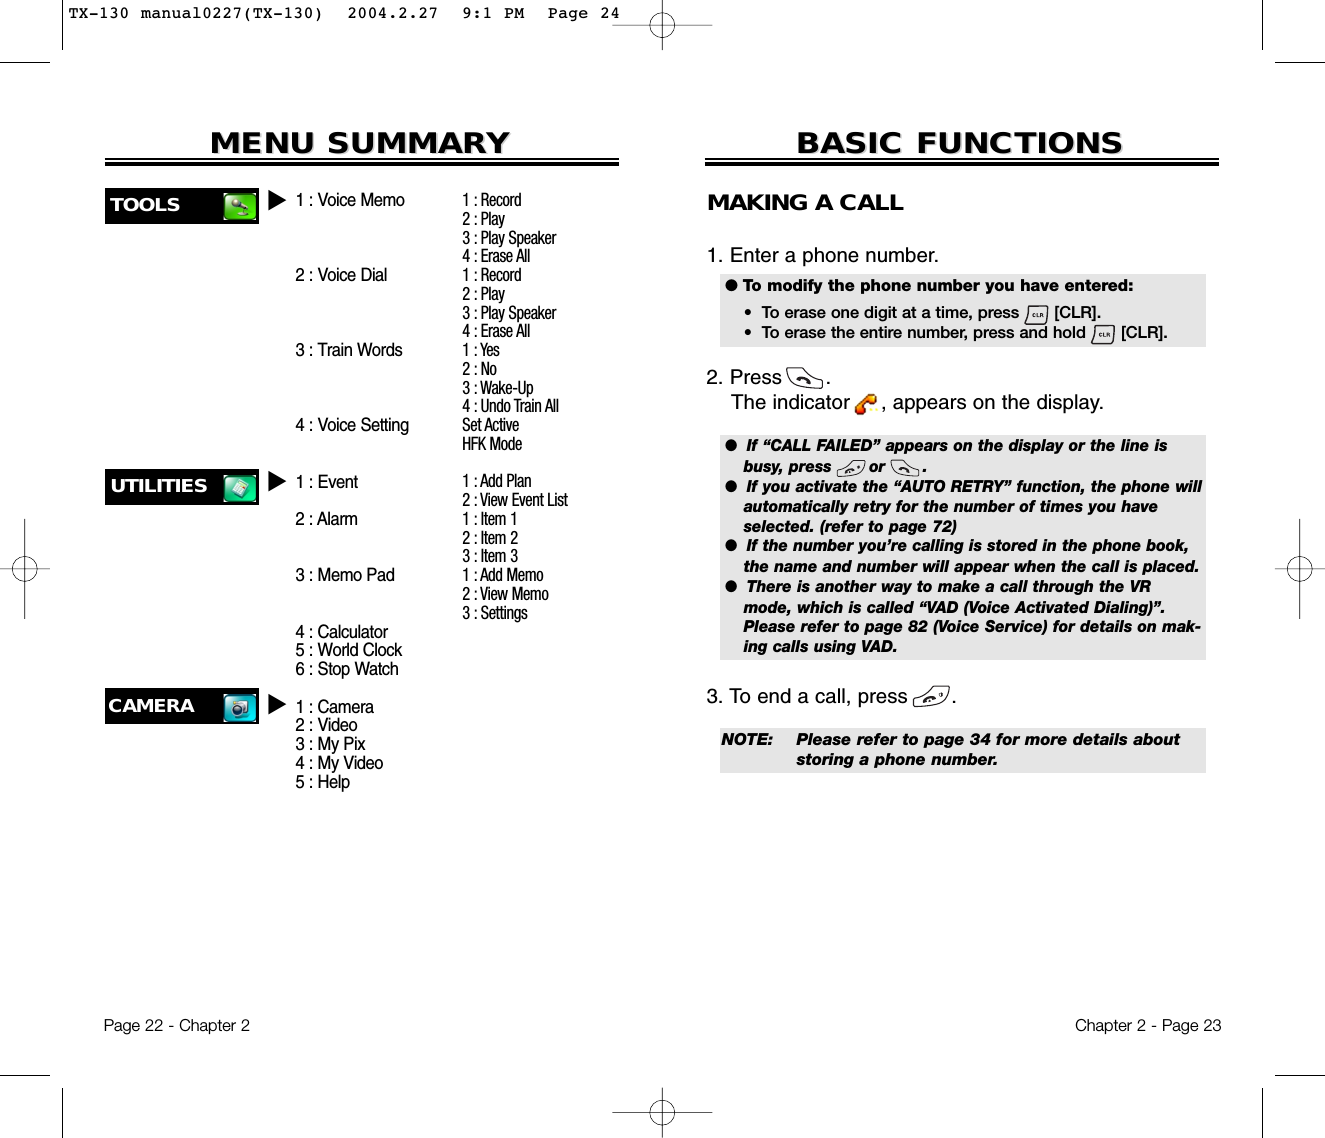 Chapter 2 - Page 23BASIC FUNCTIONSBASIC FUNCTIONSMAKING A CALL1. Enter a phone number. 2. Press       . The indicator     , appears on the display.3. To end a call, press       . Page 22 - Chapter 2MENU SUMMARMENU SUMMARYYCAMERAu1:Record2 : Play3 : Play Speaker4 : Erase All1 : Record2 : Play3 : Play Speaker4 : Erase All1 : Yes2 : No3 : Wake-Up4 : Undo Train AllSet ActiveHFK Mode1 : Add Plan2 : View Event List1 : Item 12 : Item 23 : Item 31 : Add Memo2 : View Memo3 : Settings1 : Voice Memo2 : Voice Dial3 : Train Words4 : Voice Setting1 : Event2 : Alarm3 : Memo Pad4 : Calculator5 : World Clock6 : Stop Watch1 : Camera2 : Video3 : My Pix4 : My Video5 : Help●  If “CALL FAILED” appears on the display or the line isbusy, press       or       . ●  If you activate the “AUTO RETRY” function, the phone willautomatically retry for the number of times you haveselected. (refer to page 72)●  If the number you’re calling is stored in the phone book,the name and number will appear when the call is placed.●  There is another way to make a call through the VRmode, which is called “VAD (Voice Activated Dialing)”.Please refer to page 82 (Voice Service) for details on mak-ing calls using VAD.● To modify the phone number you have entered:•  To erase one digit at a time, press       [CLR].•  To erase the entire number, press and hold       [CLR].NOTE: Please refer to page 34 for more details about storing a phone number.UTILITIES uTOOLS uTX-130 manual0227(TX-130)  2004.2.27  9:1 PM  Page 24